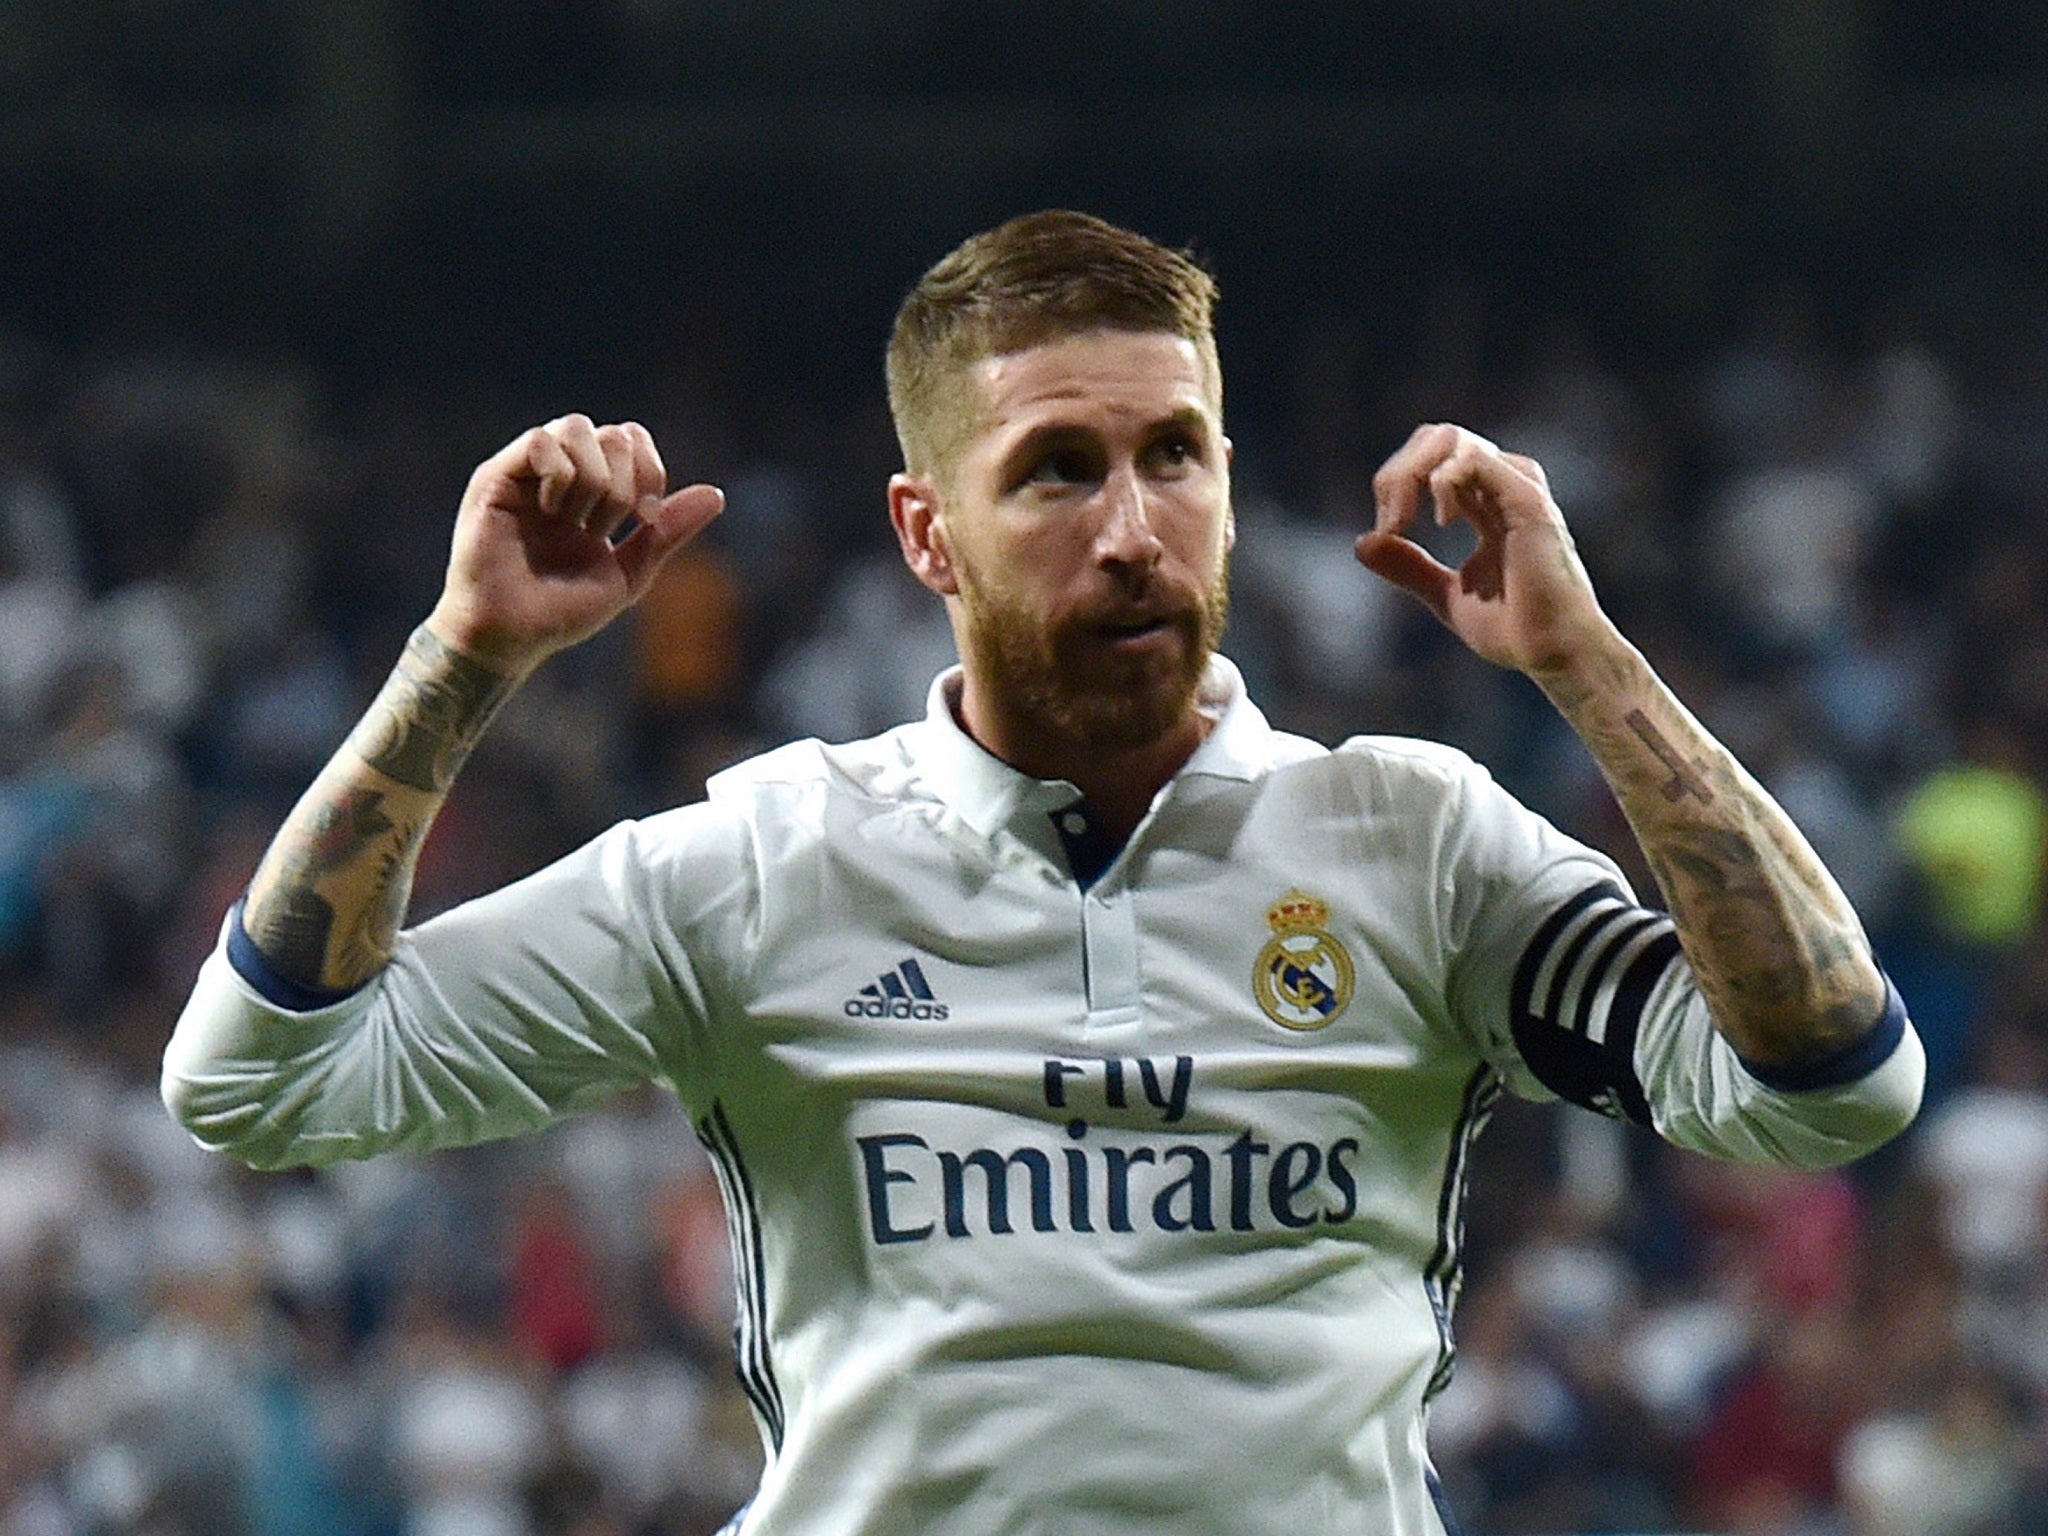 Sergio Ramos conceded a penalty but then scored the equaliser for Madrid